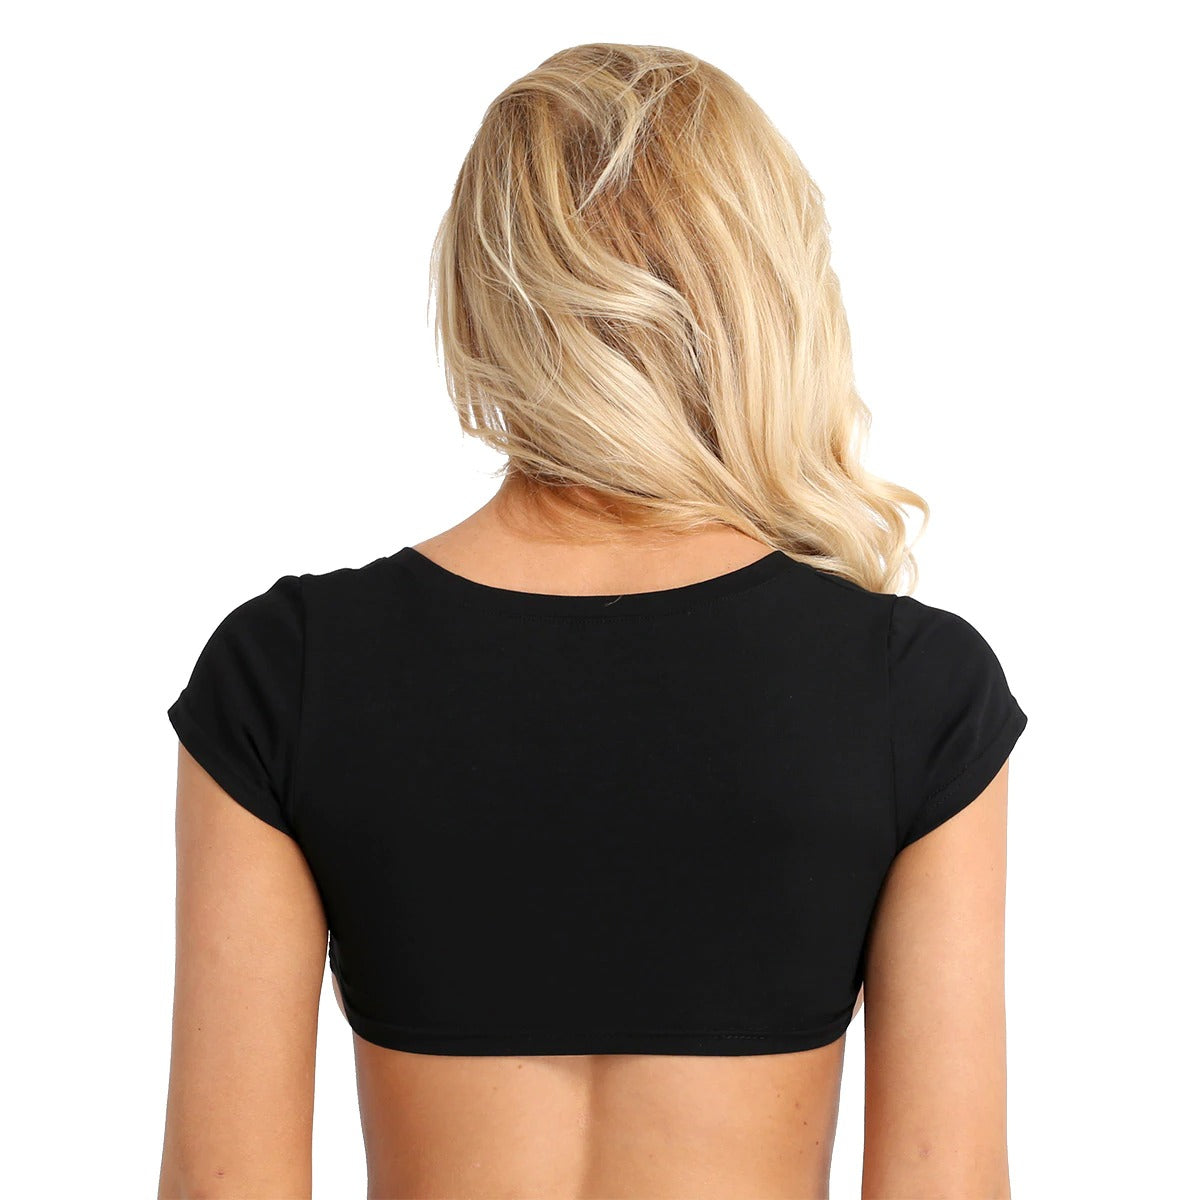 Super Cropped Summer Sexy T shirt / Women's Alternative Fashion Cotton Tops for Night Hangout - HARD'N'HEAVY